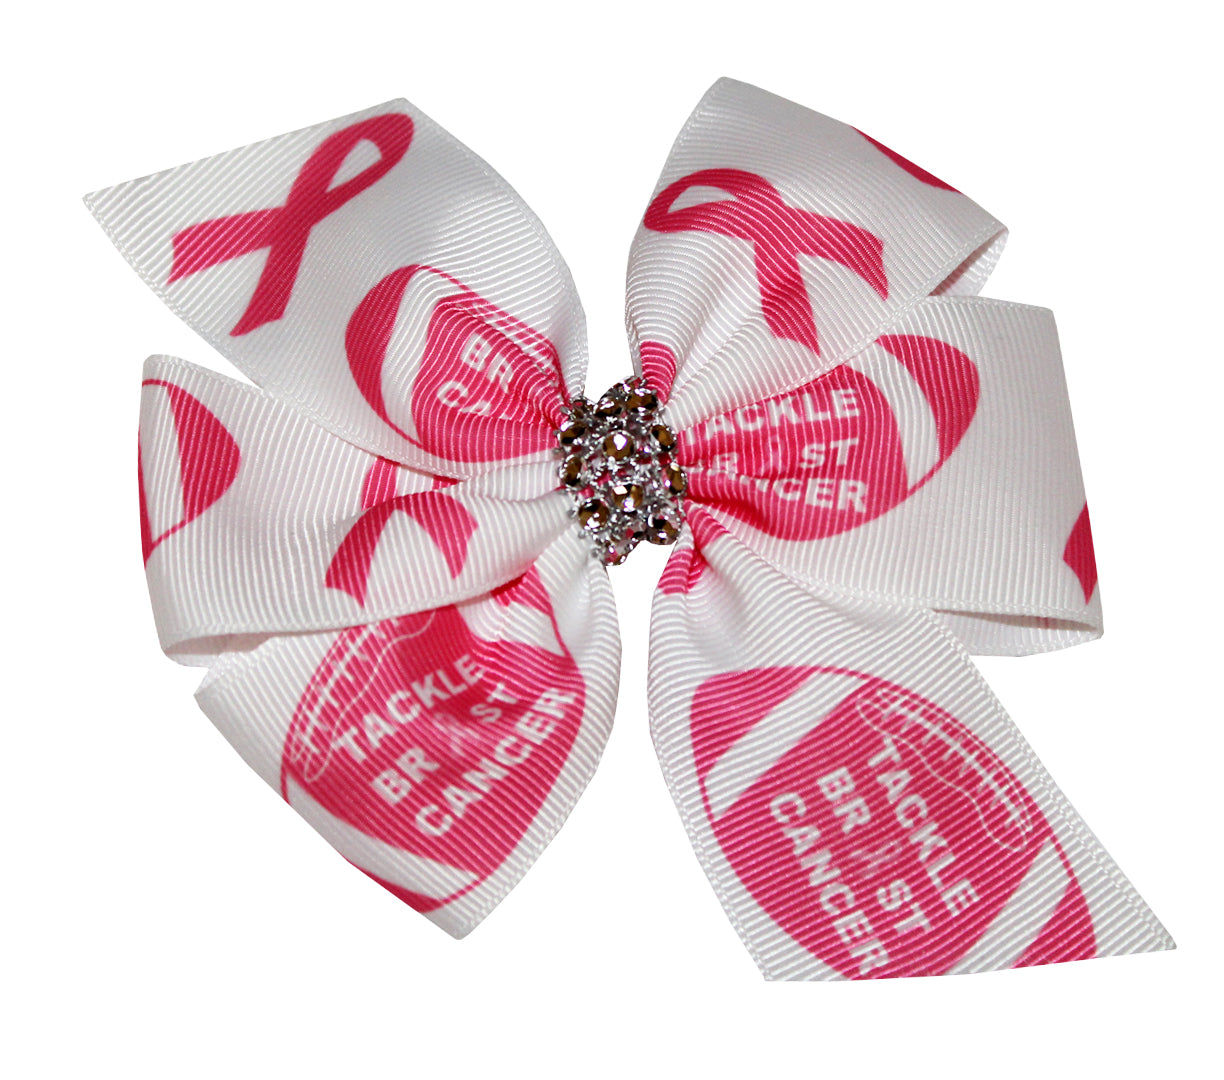  Holiday Shop 3 inch Grosgrain Ribbon Pink Breast Cancer Printed  are for Hair Bows Crafts Gifts and More (3 Yards)